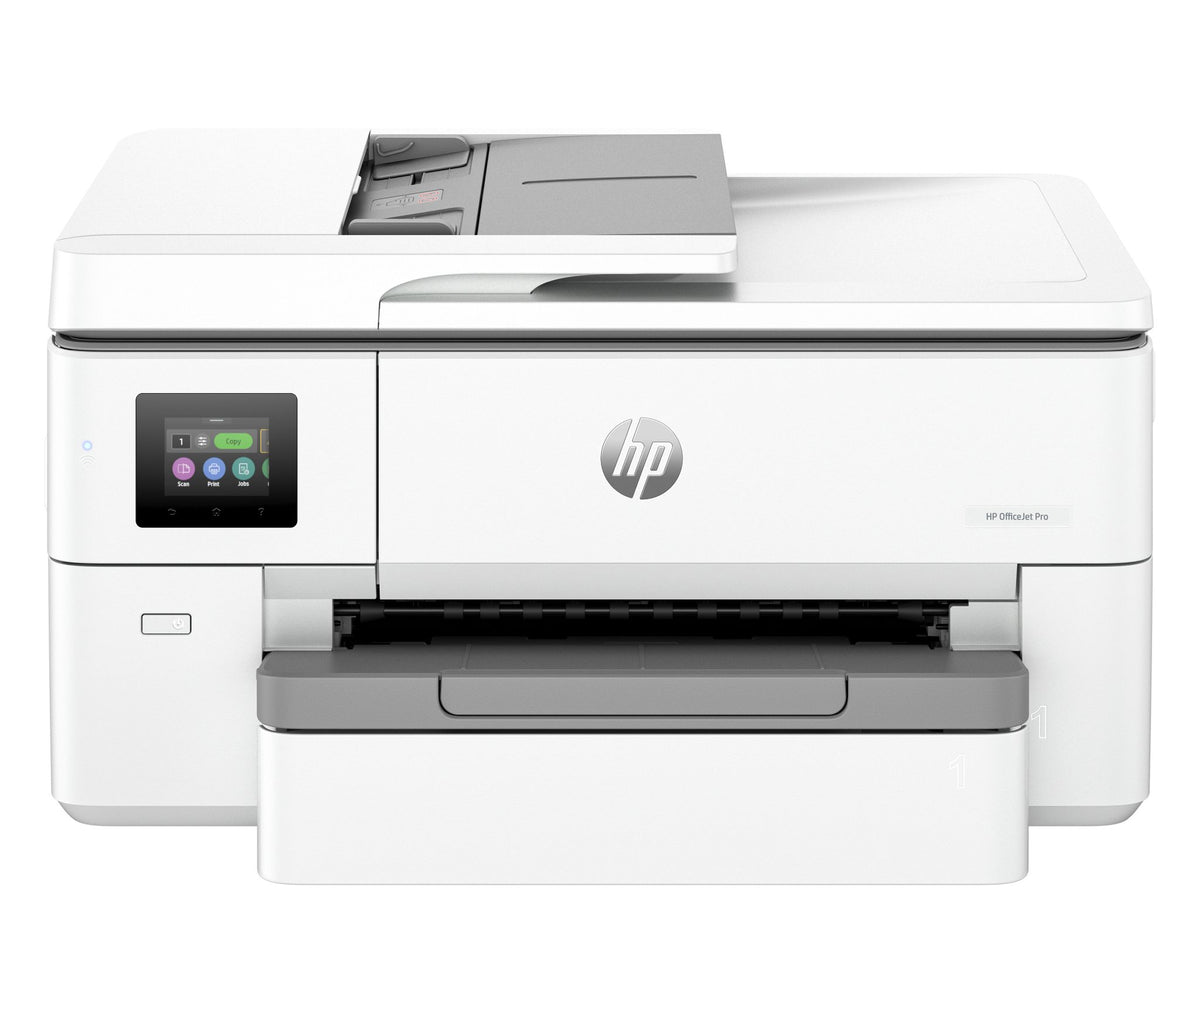 HP OfficeJet Pro HP 9720e Wide Format All-in-One Printer, Color, Printer for Small office, Print, copy, scan, HP+; HP Instant Ink eligible; Wireless; Two-sided printing; Automatic document feeder; Print from phone or tablet; Scan to email; Scan to pdf; To